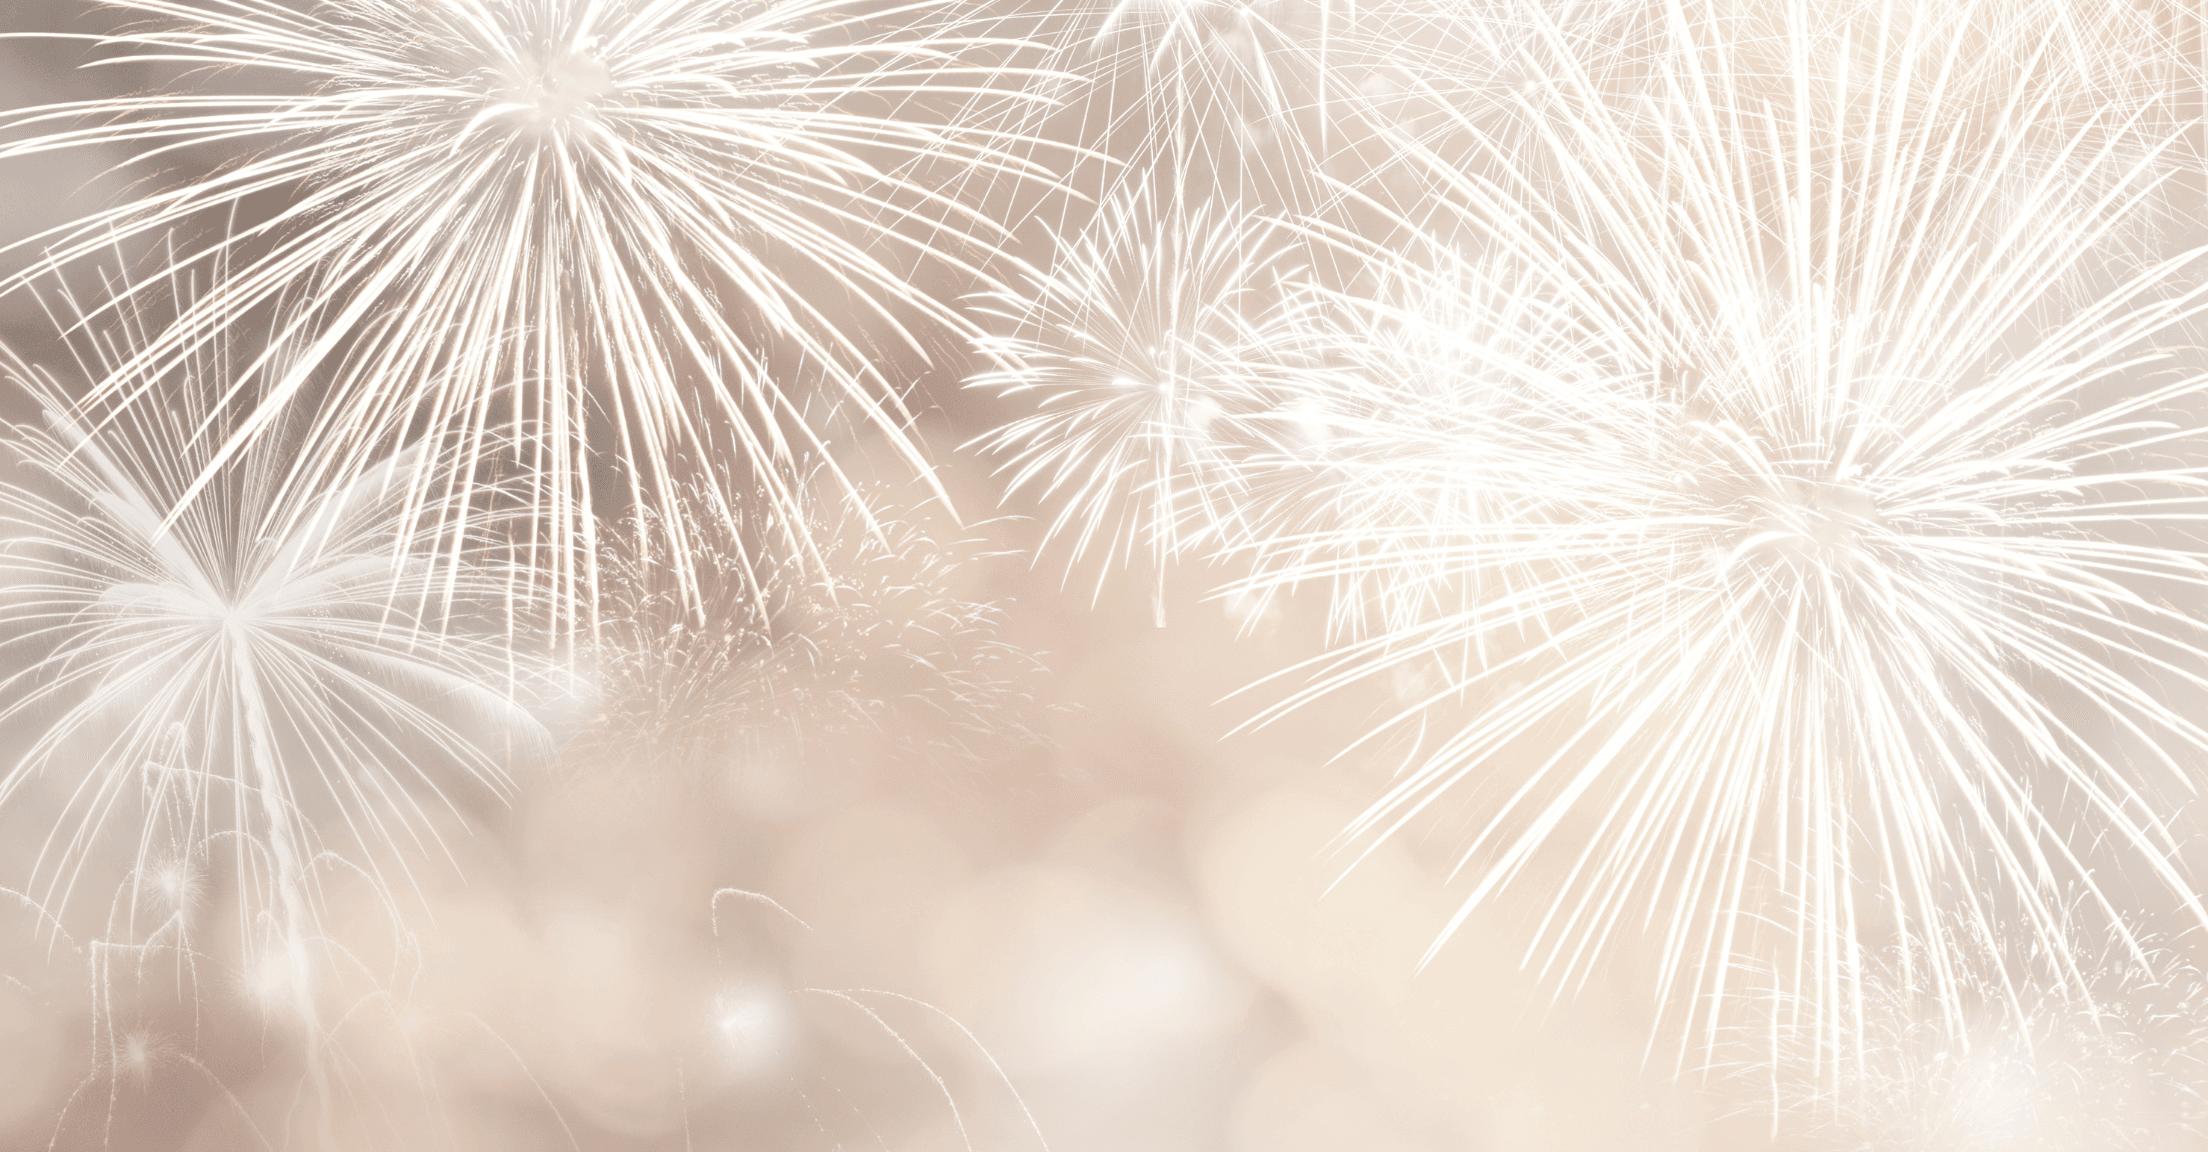 White fireworks on a beige background to represent celebrating the new year